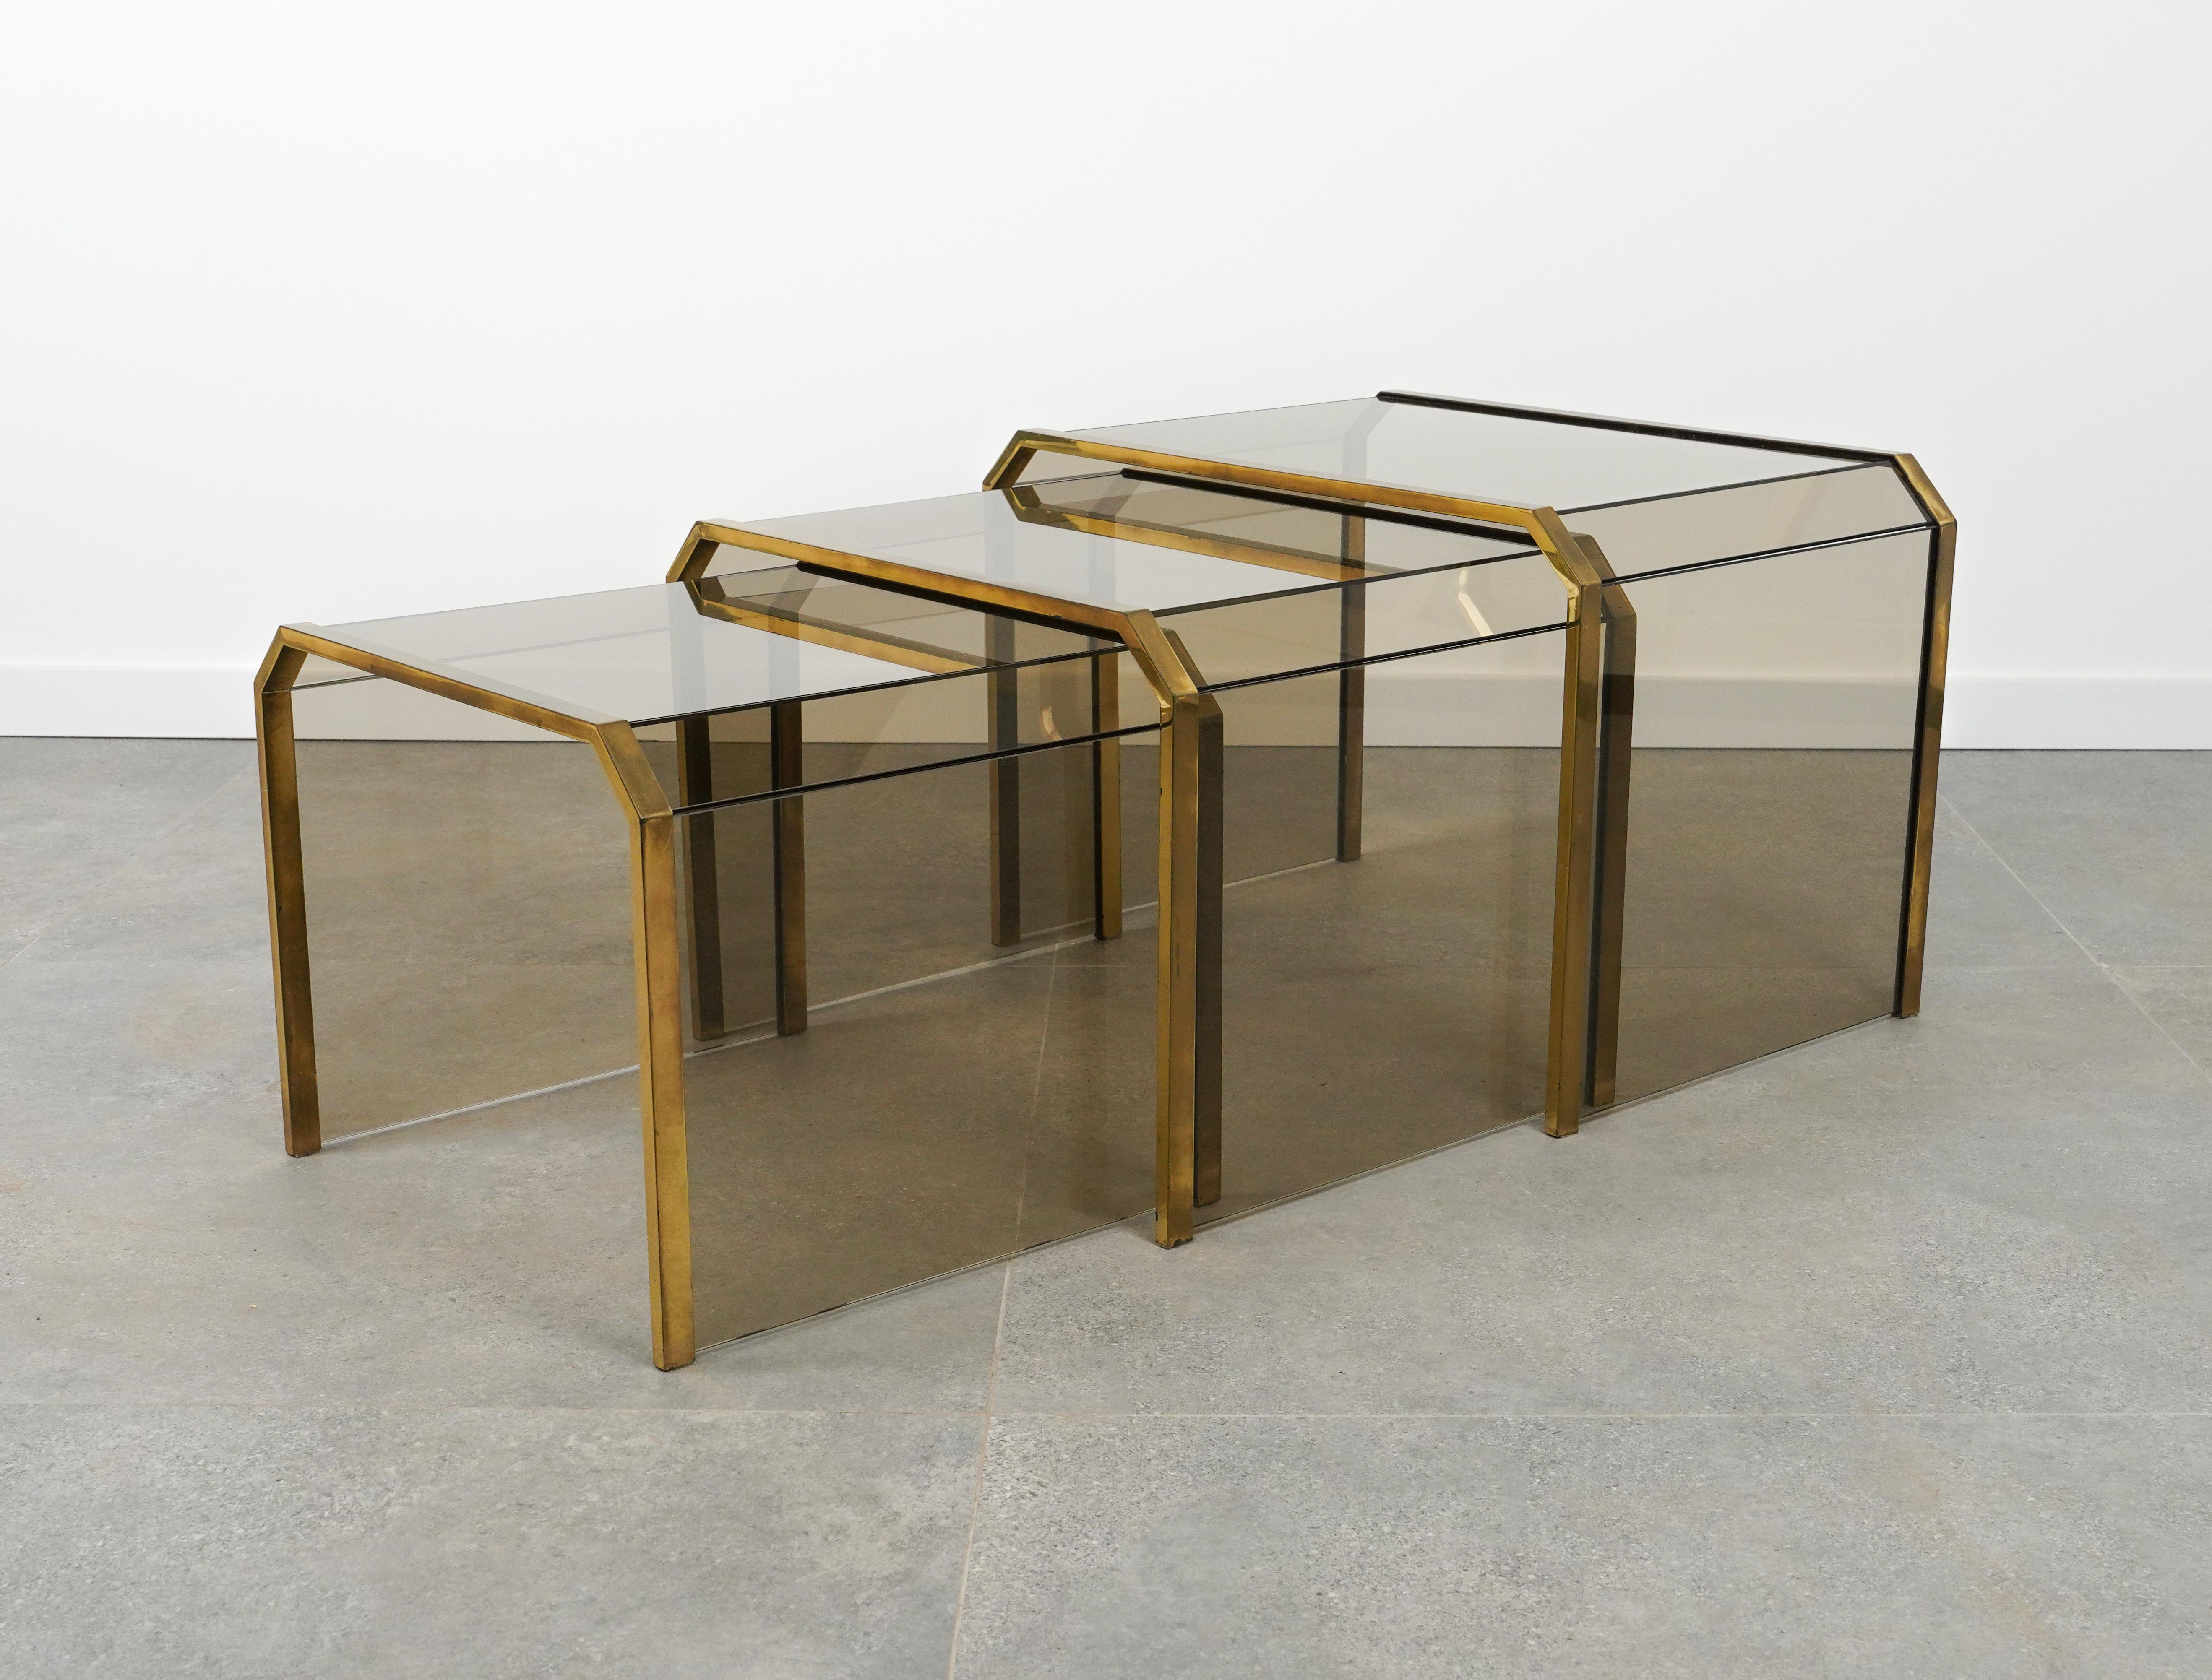 Brass & Glass Set of Three Nesting Tables Gallotti & Radice Style, Italy 1970s For Sale 2